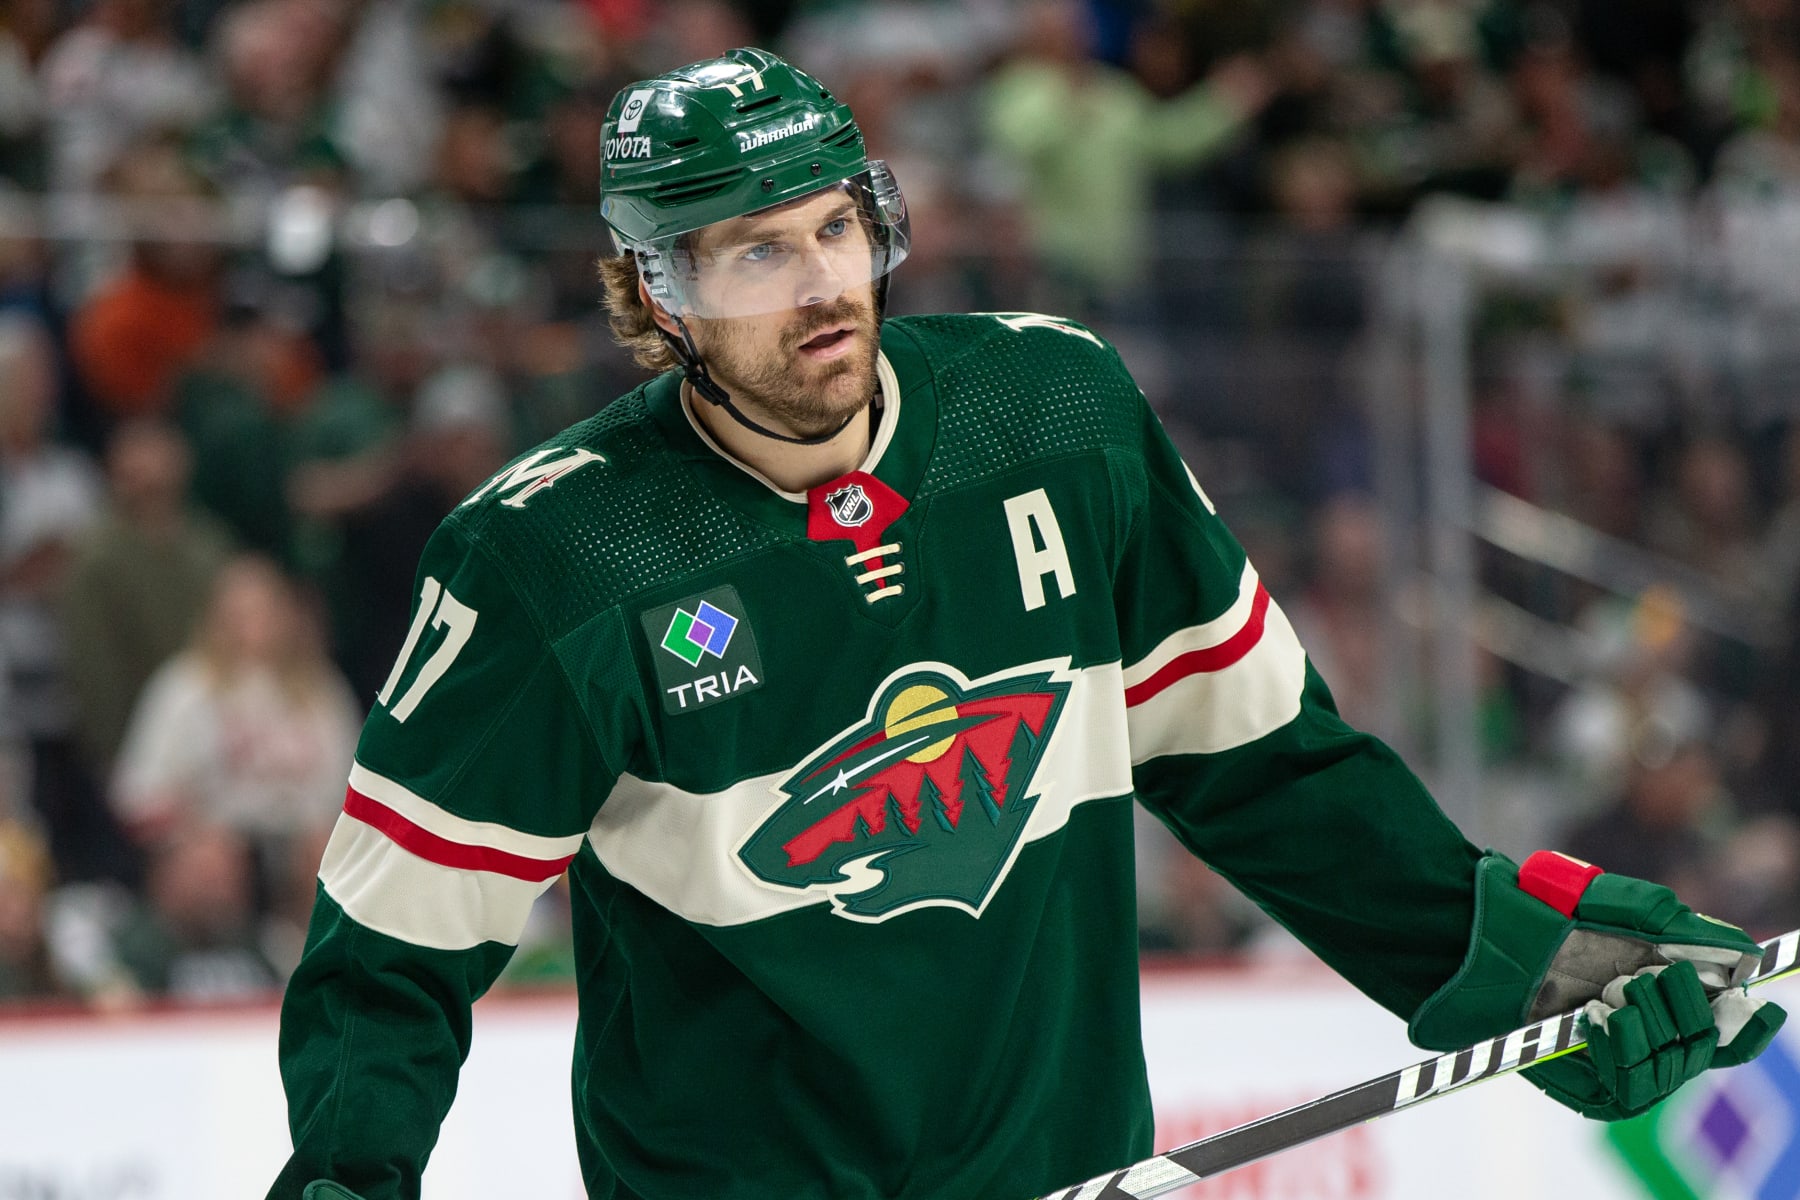 Wild sign right wings Zuccarello and Foligno to contract